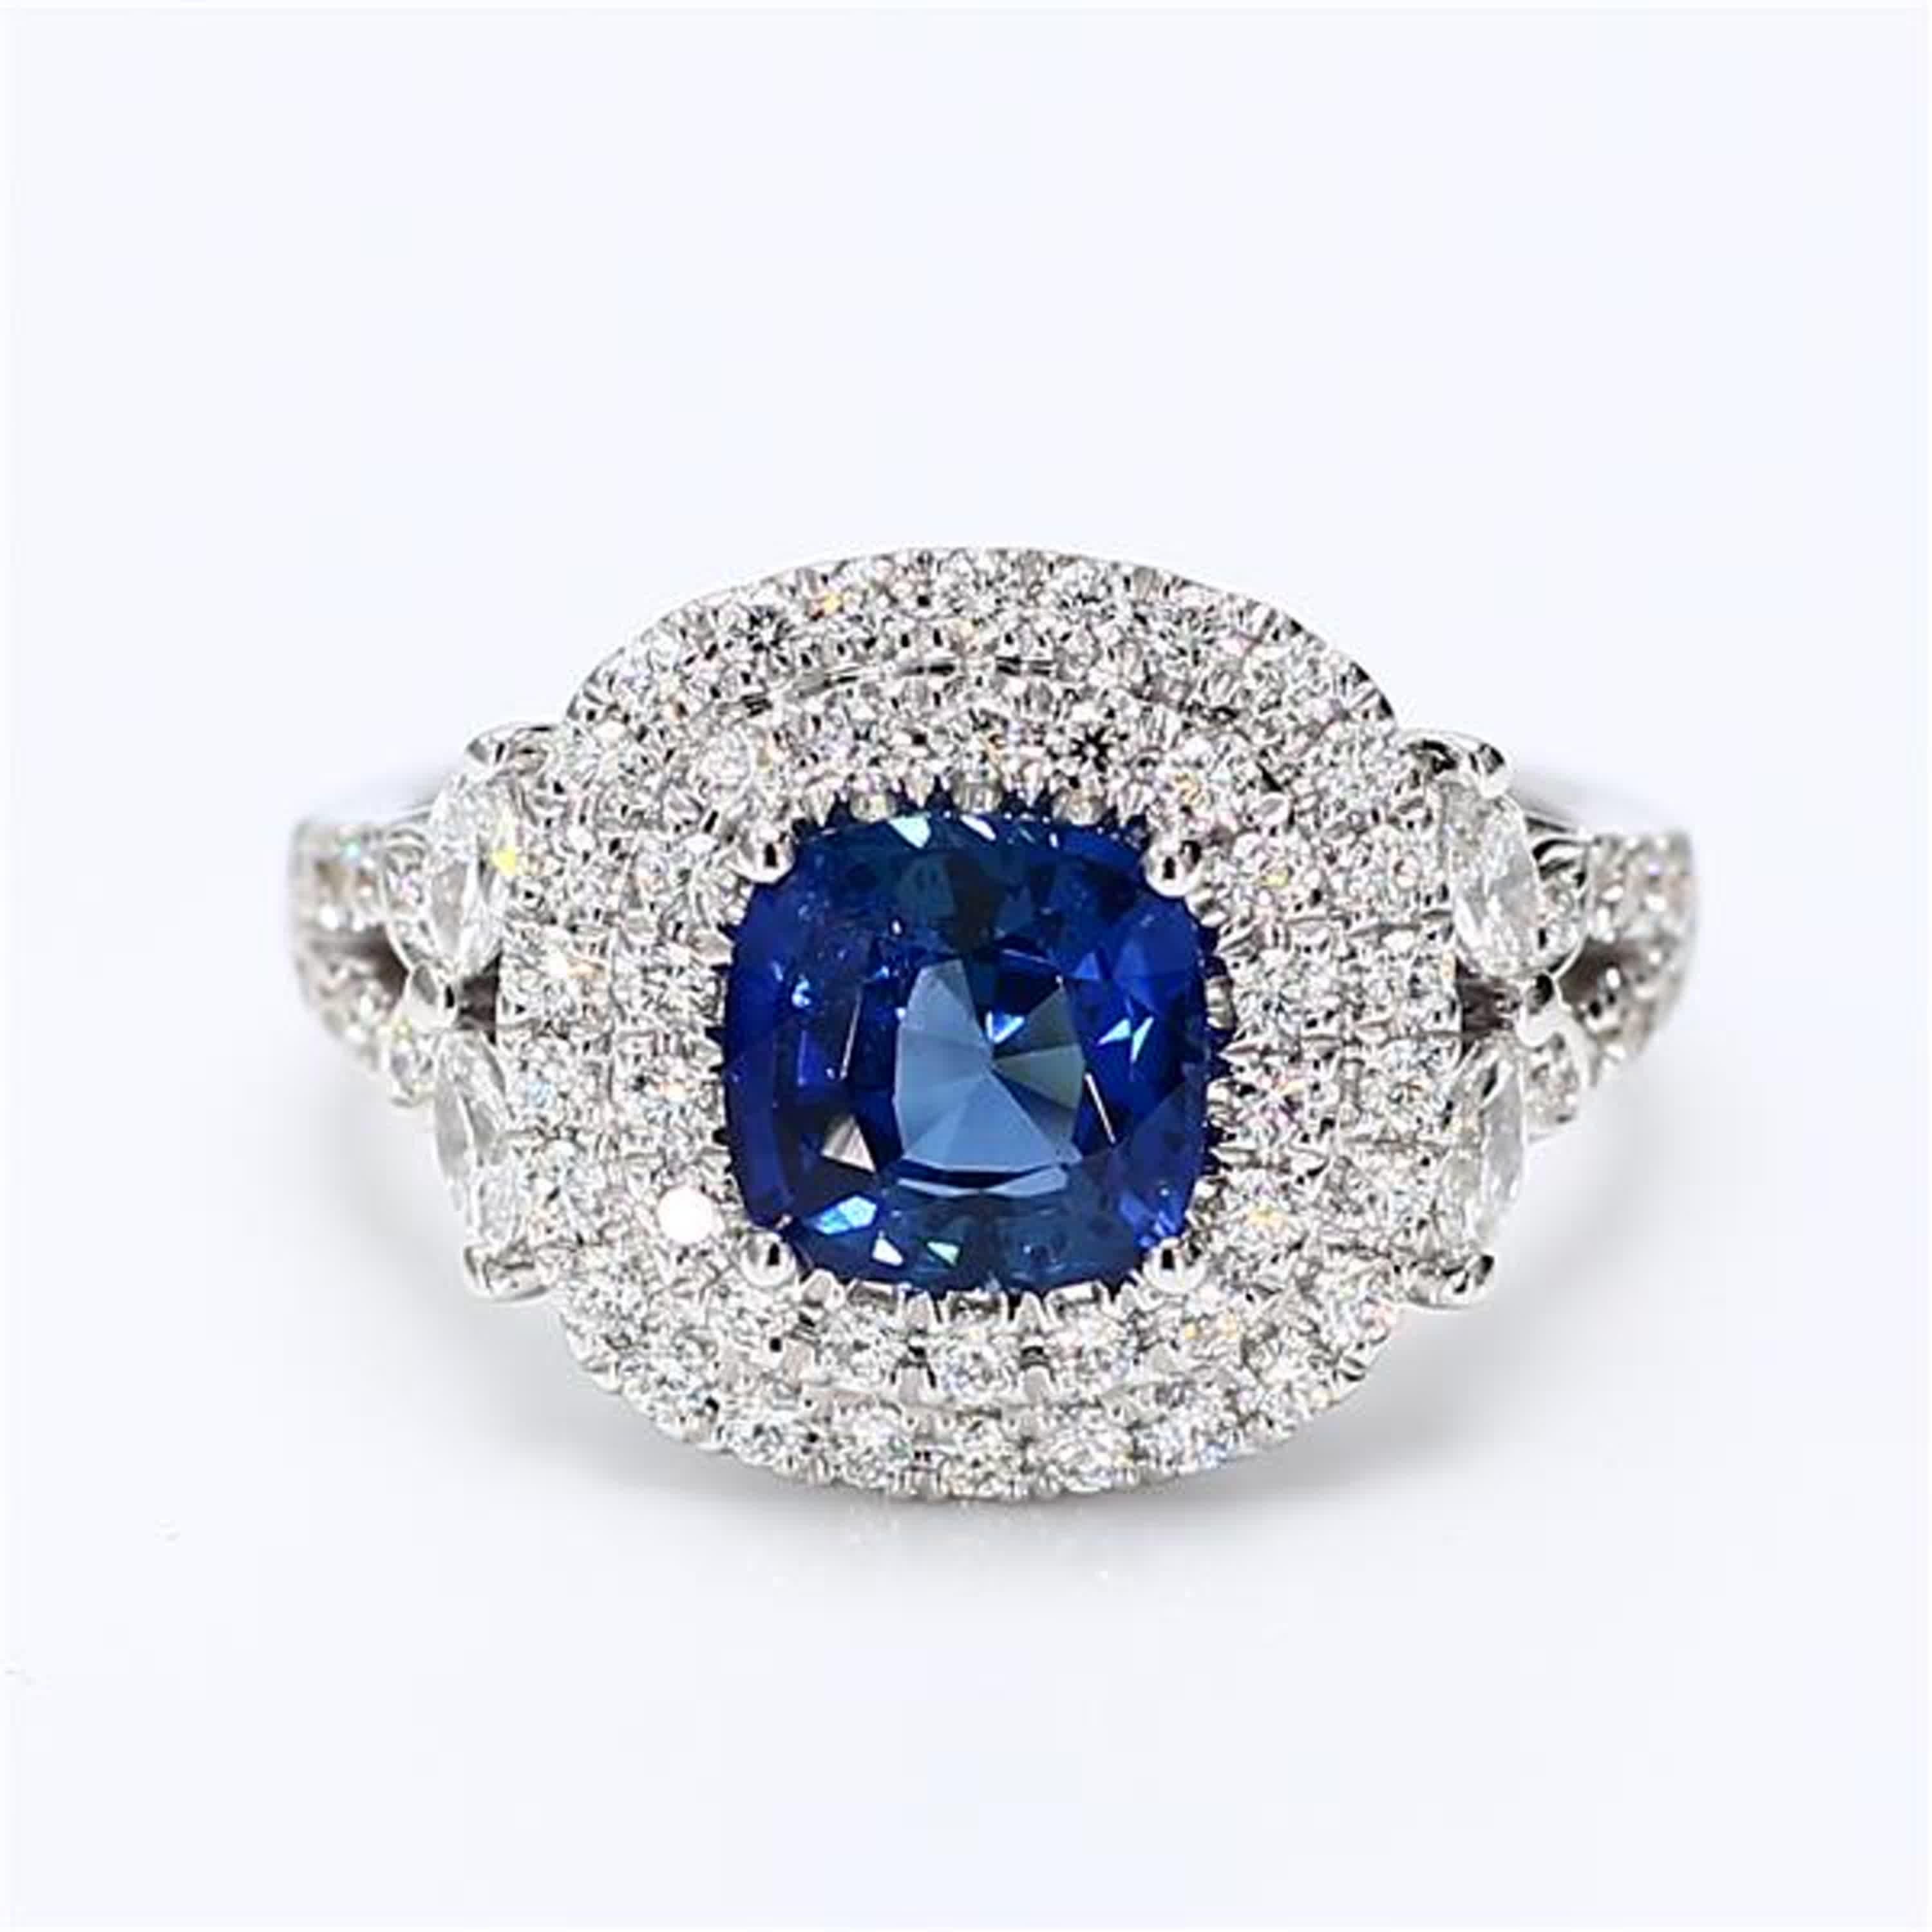 RareGemWorld's classic sapphire ring. Mounted in a beautiful 18K White Gold setting with a natural cushion cut blue sapphire. The sapphire is surrounded by natural marquise cut white diamonds and natural round white diamond melee. This ring is